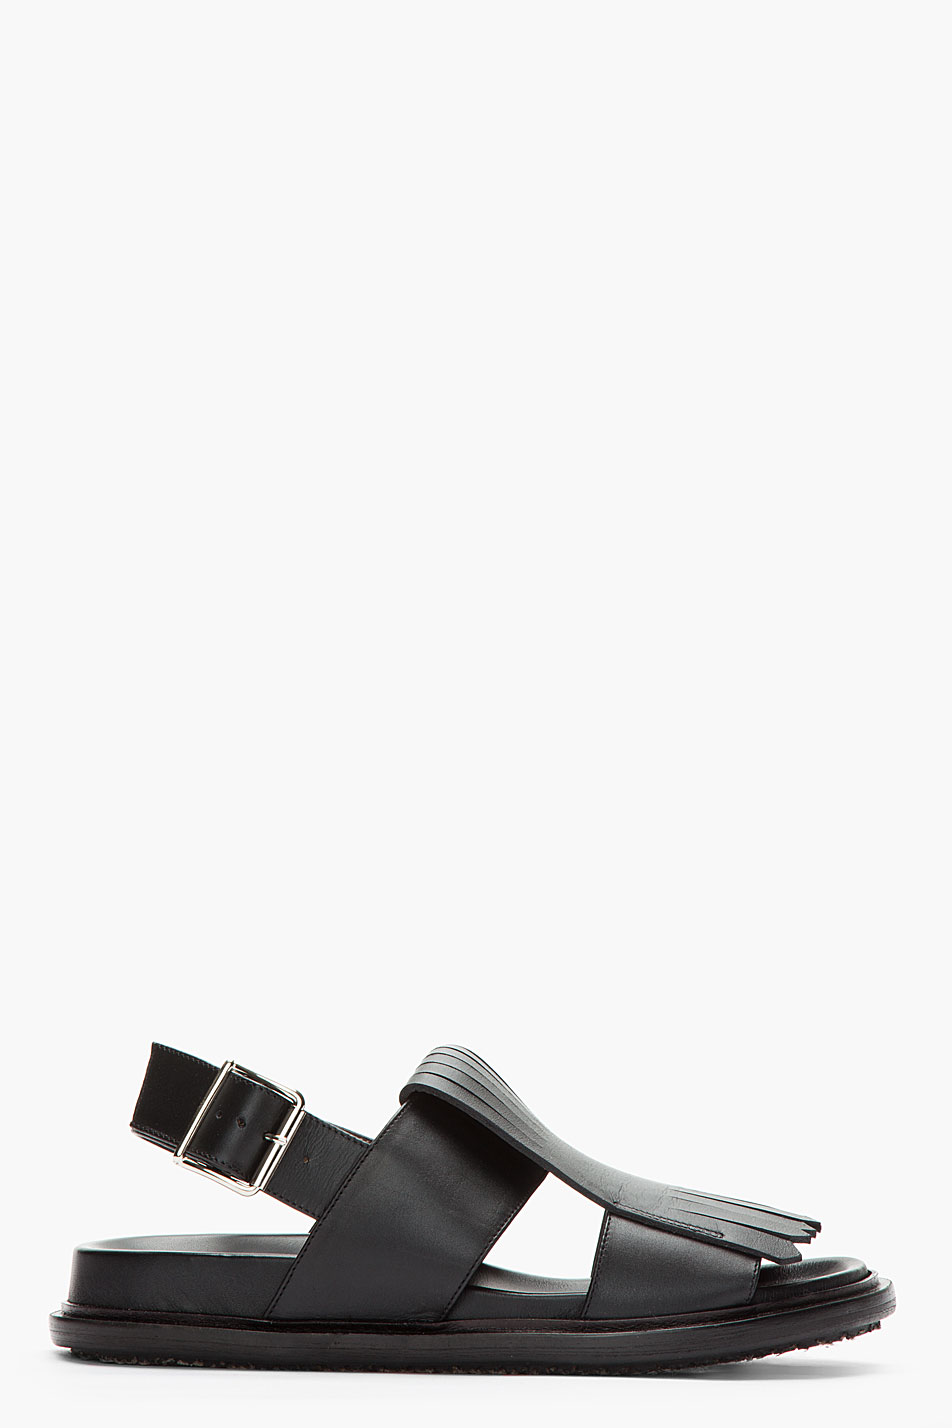 Marni Fringed Leather Sandals in Black for Men - Lyst